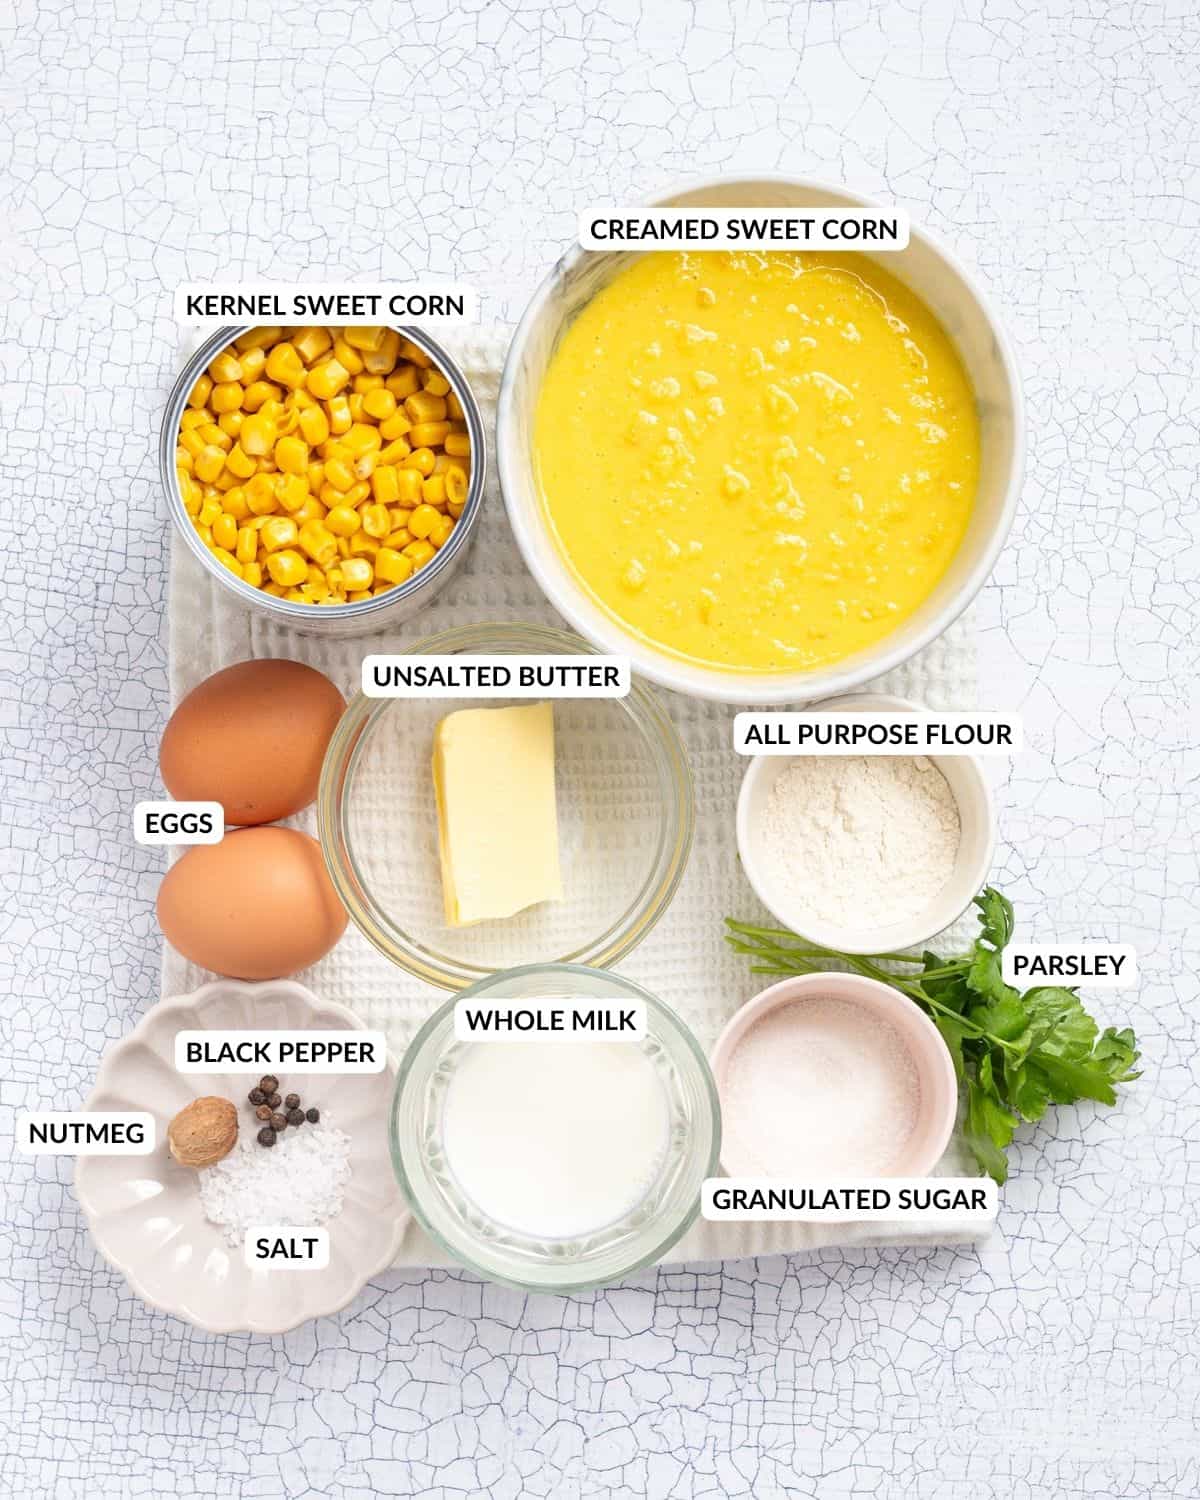 The ingredients of corn casserole arranged side by side with labels. It includes sweet corn kernels, creamed corn, two brown eggs, butter, whole milk, AP flour, sugar, parsley, and seasonings.